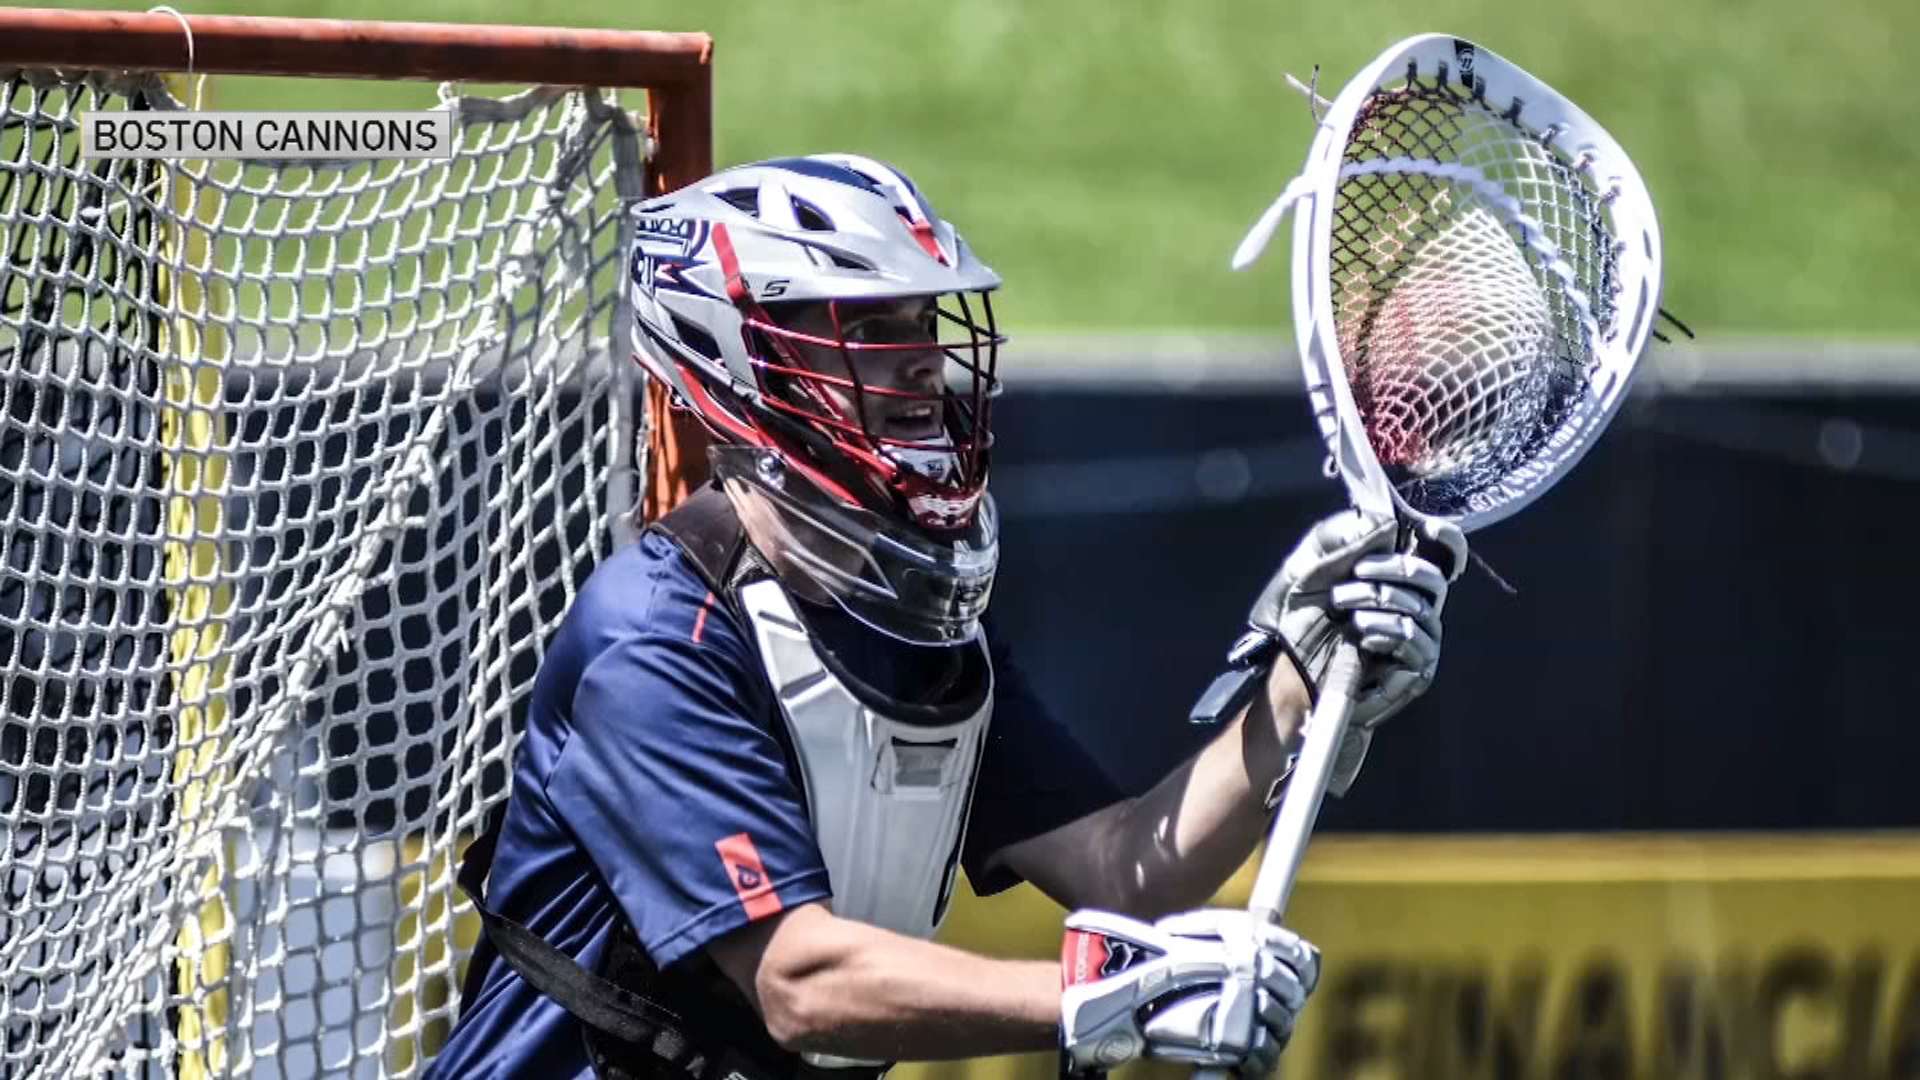 WATCH: Nick Marrocco Leads the Boston Cannons Into Battle – NECN